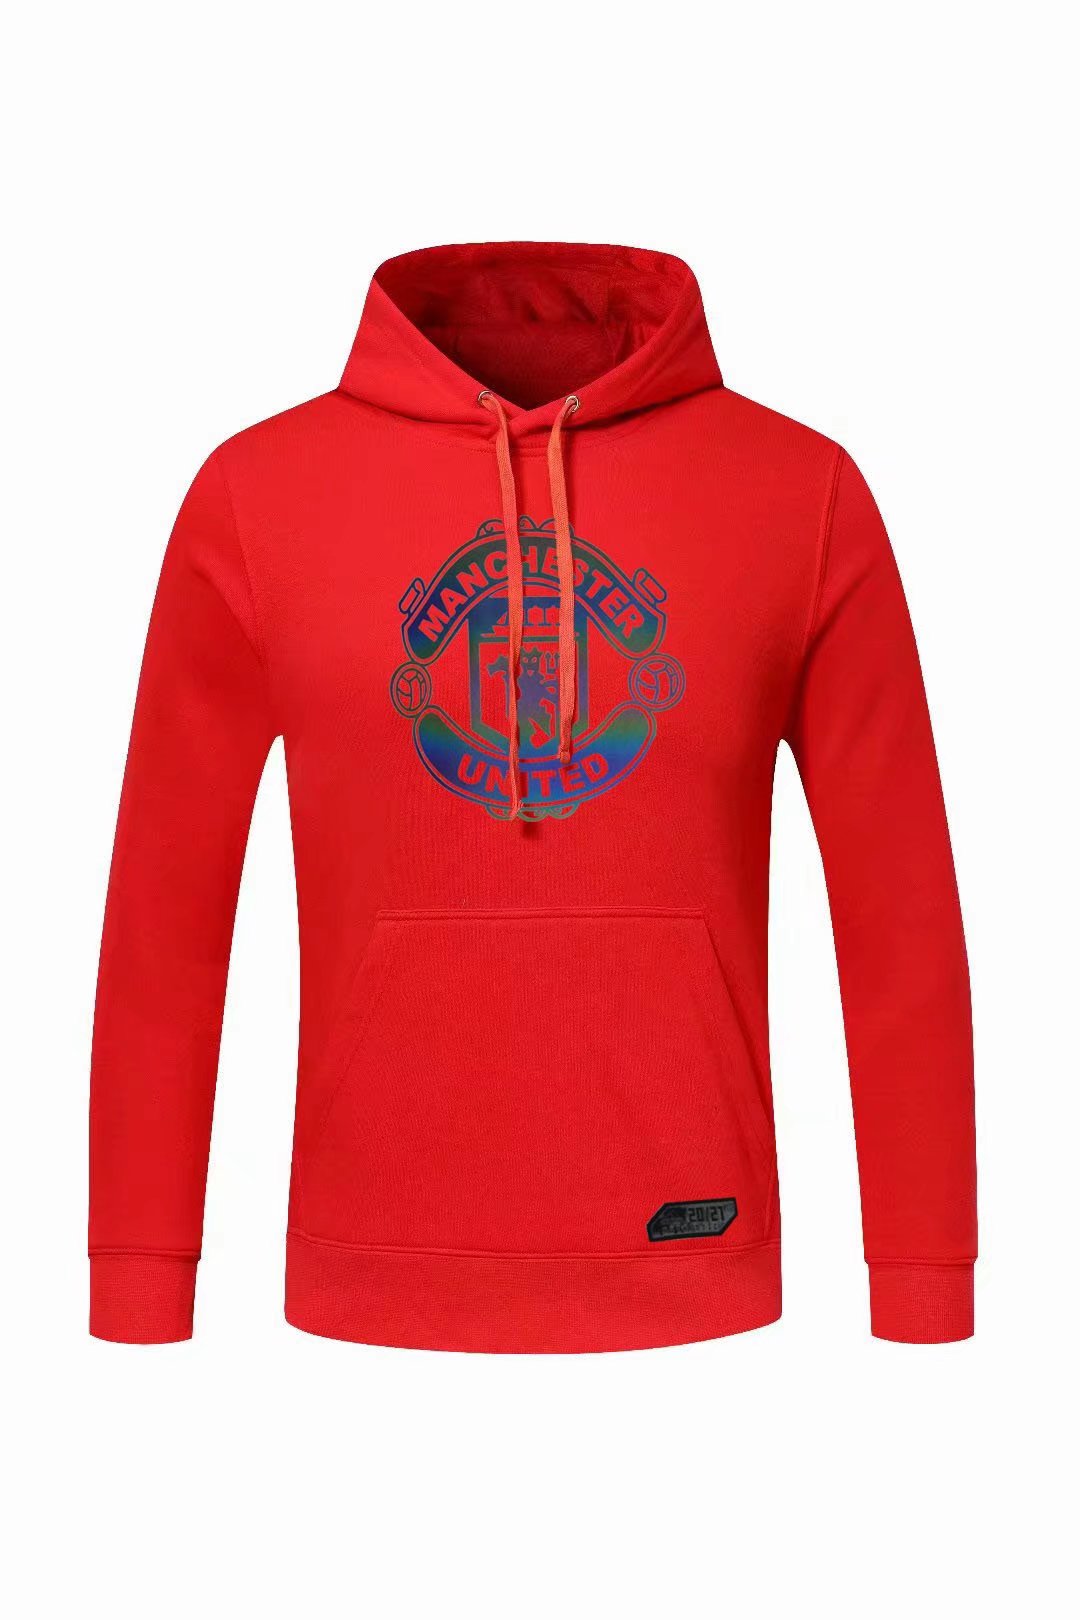 Manchester United Adult Sweater hood